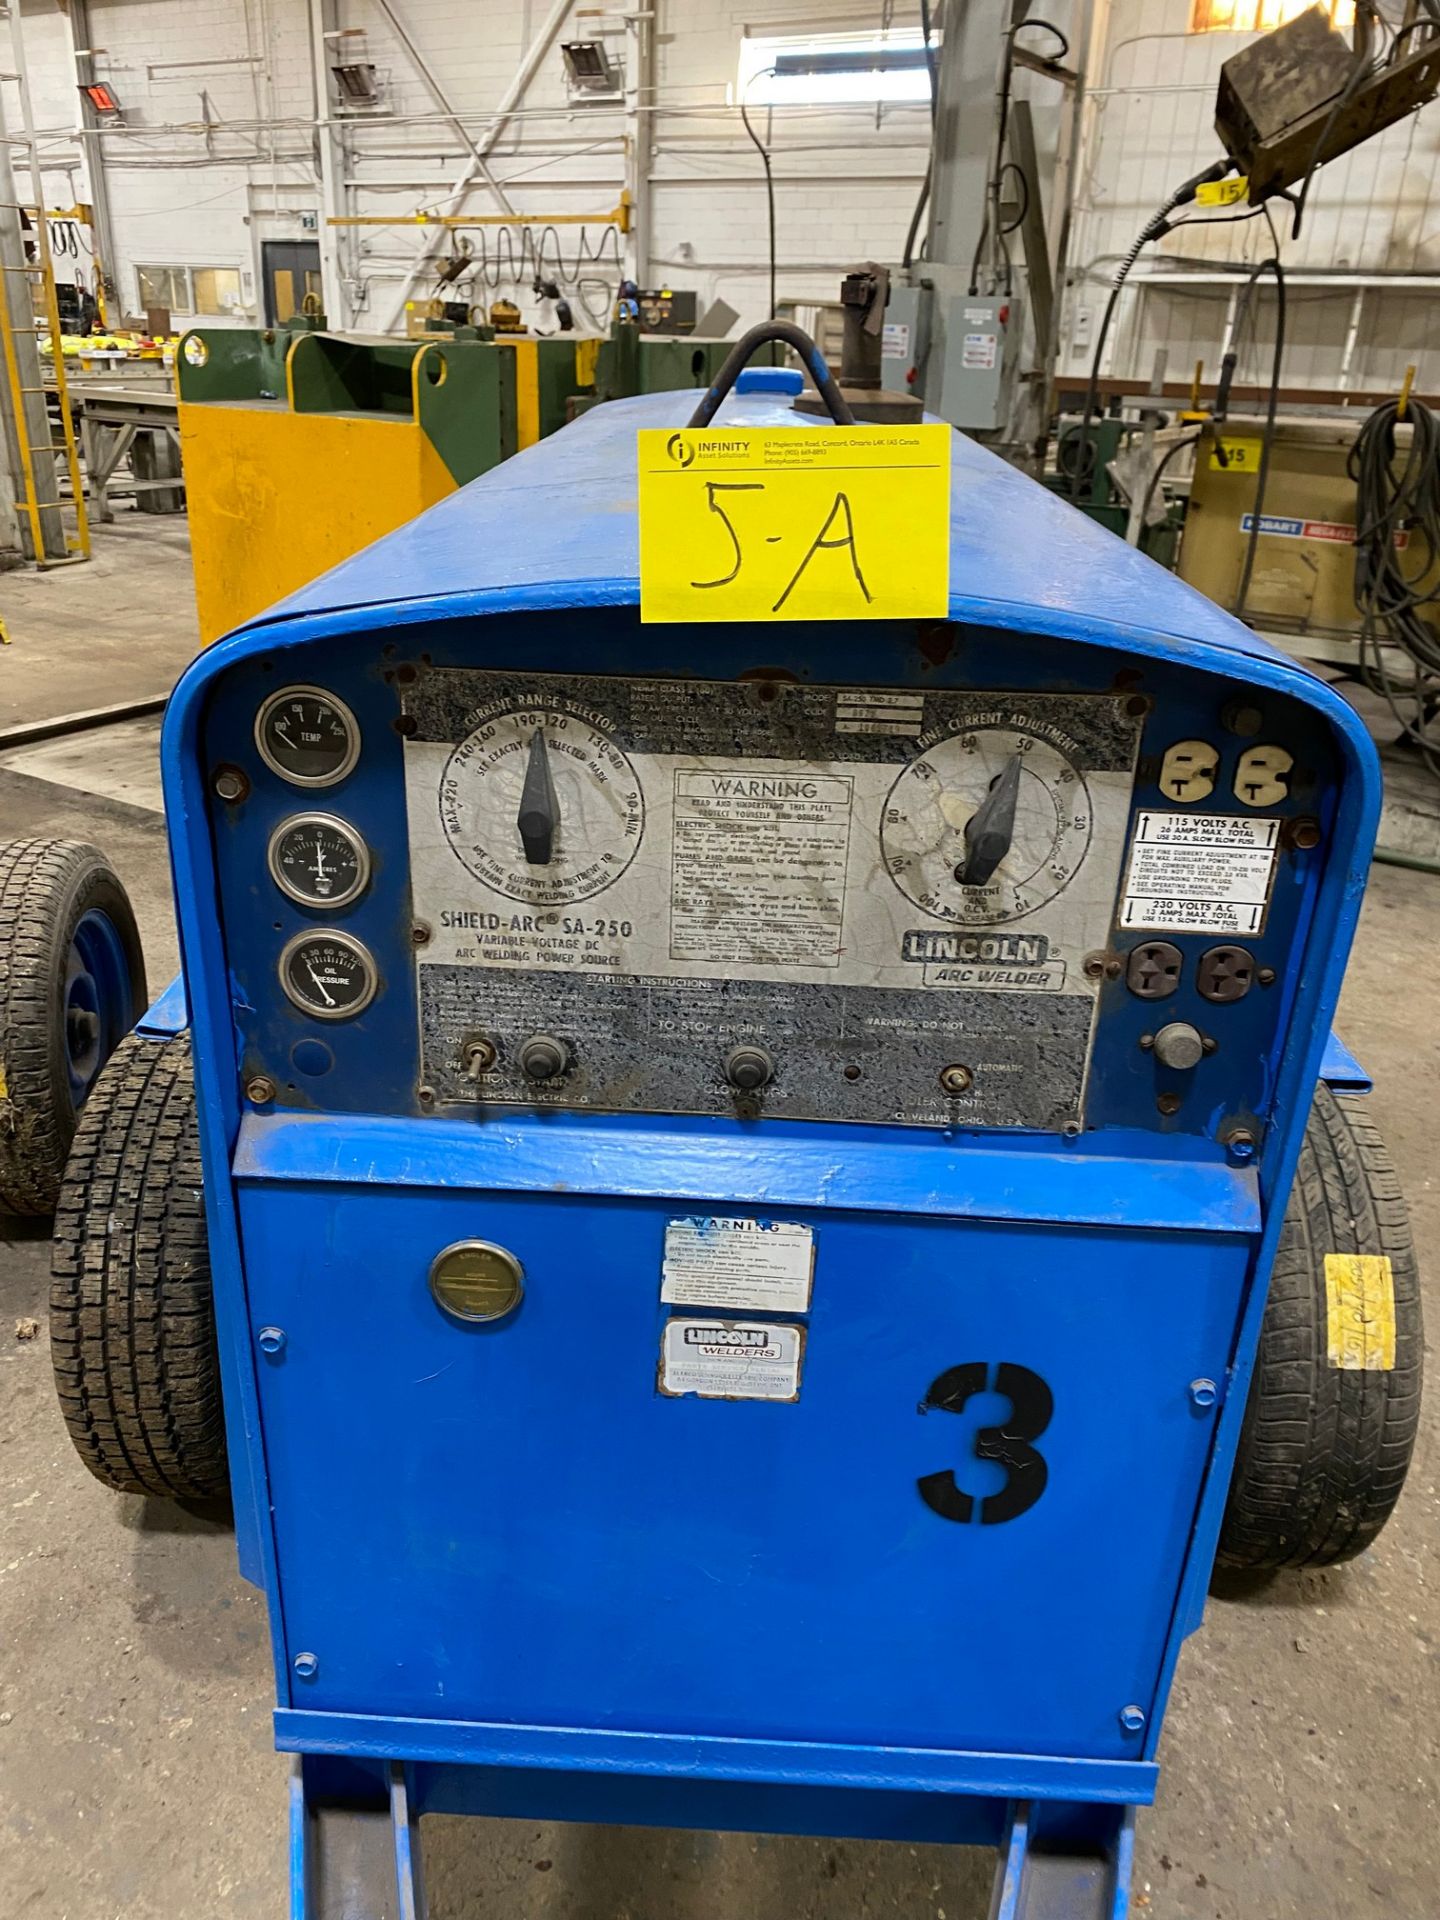 LINCOLN ELECTRIC SHIELD-ARC SA-250 VARIABLE VOLTAGE DC ARC WELDING POWER SOURCE, DIESEL POWERED, - Image 2 of 5